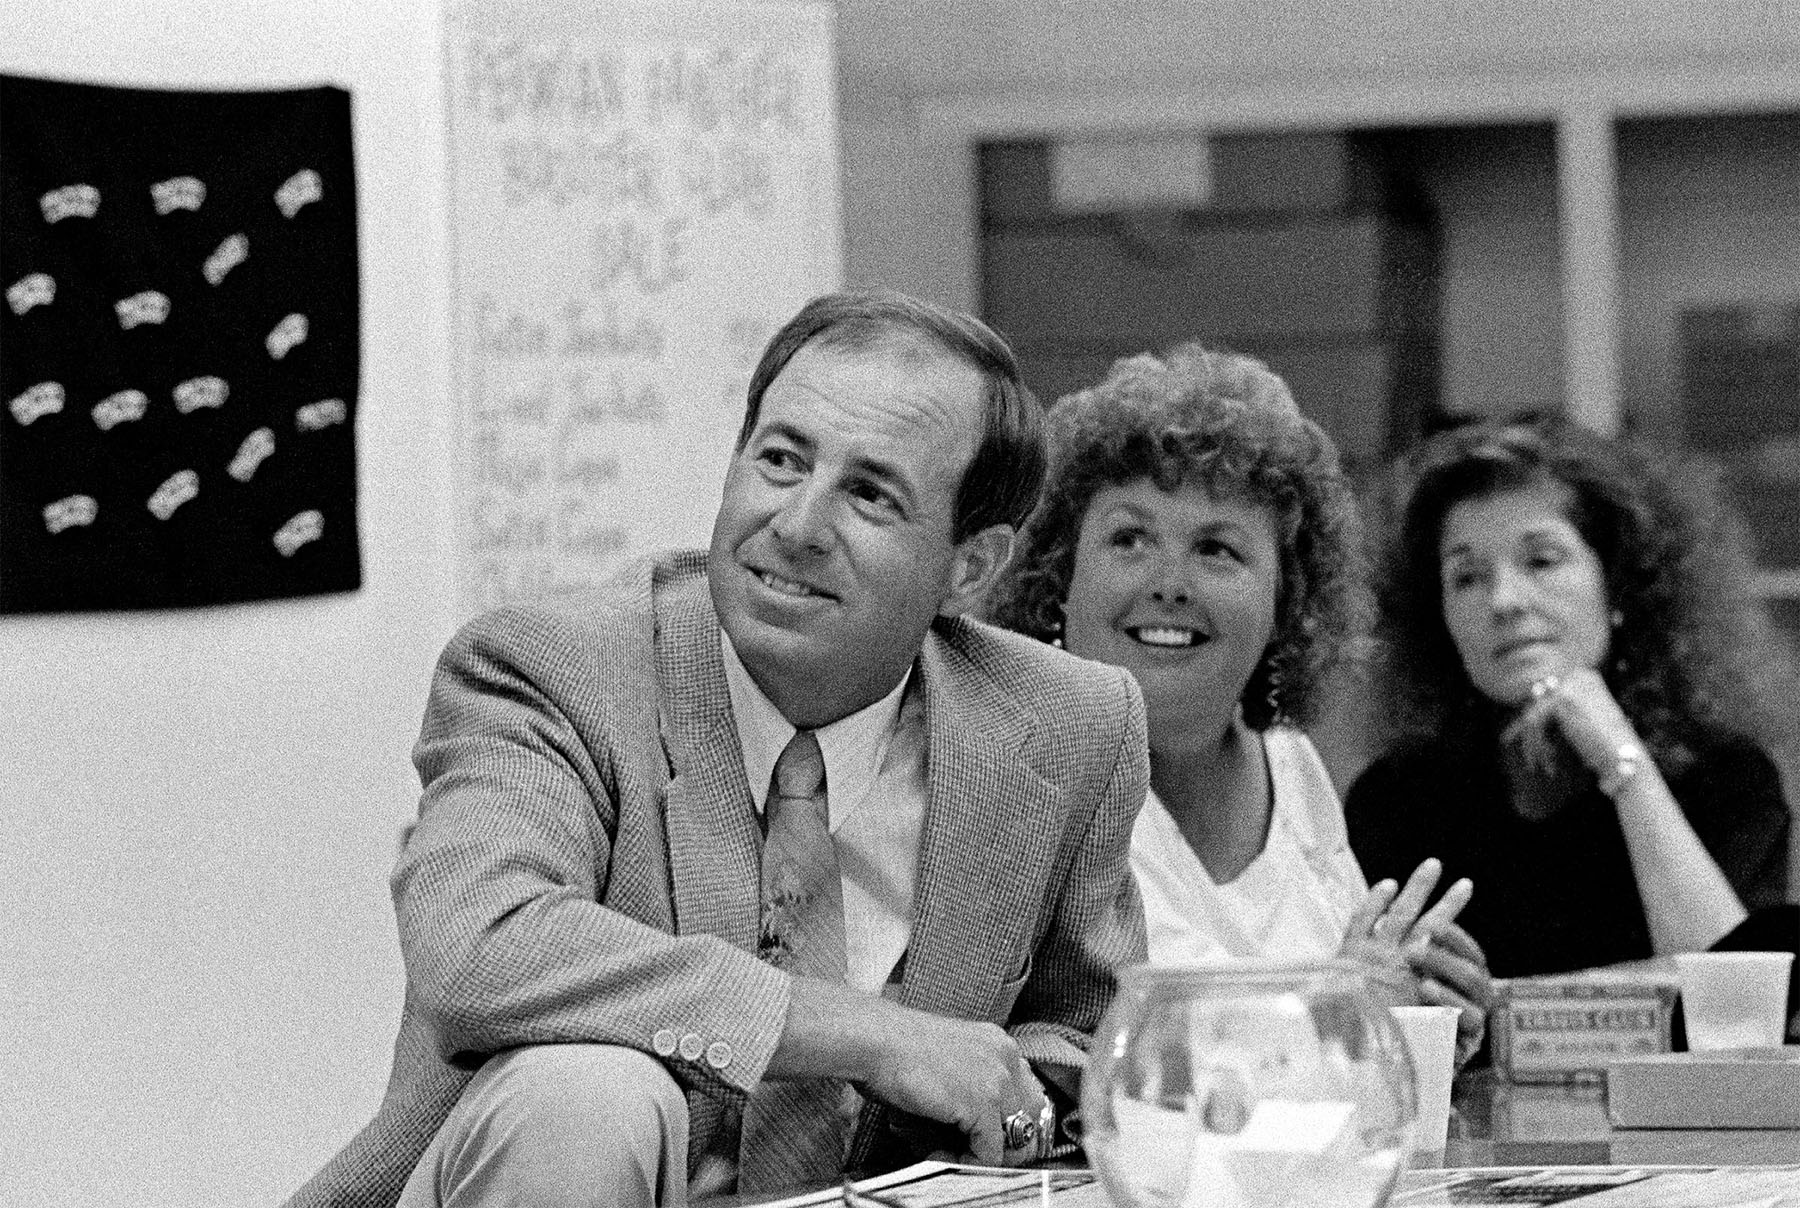 A black and white photograph of a man in a suit looking off into the distance, seated at a table next to two people 